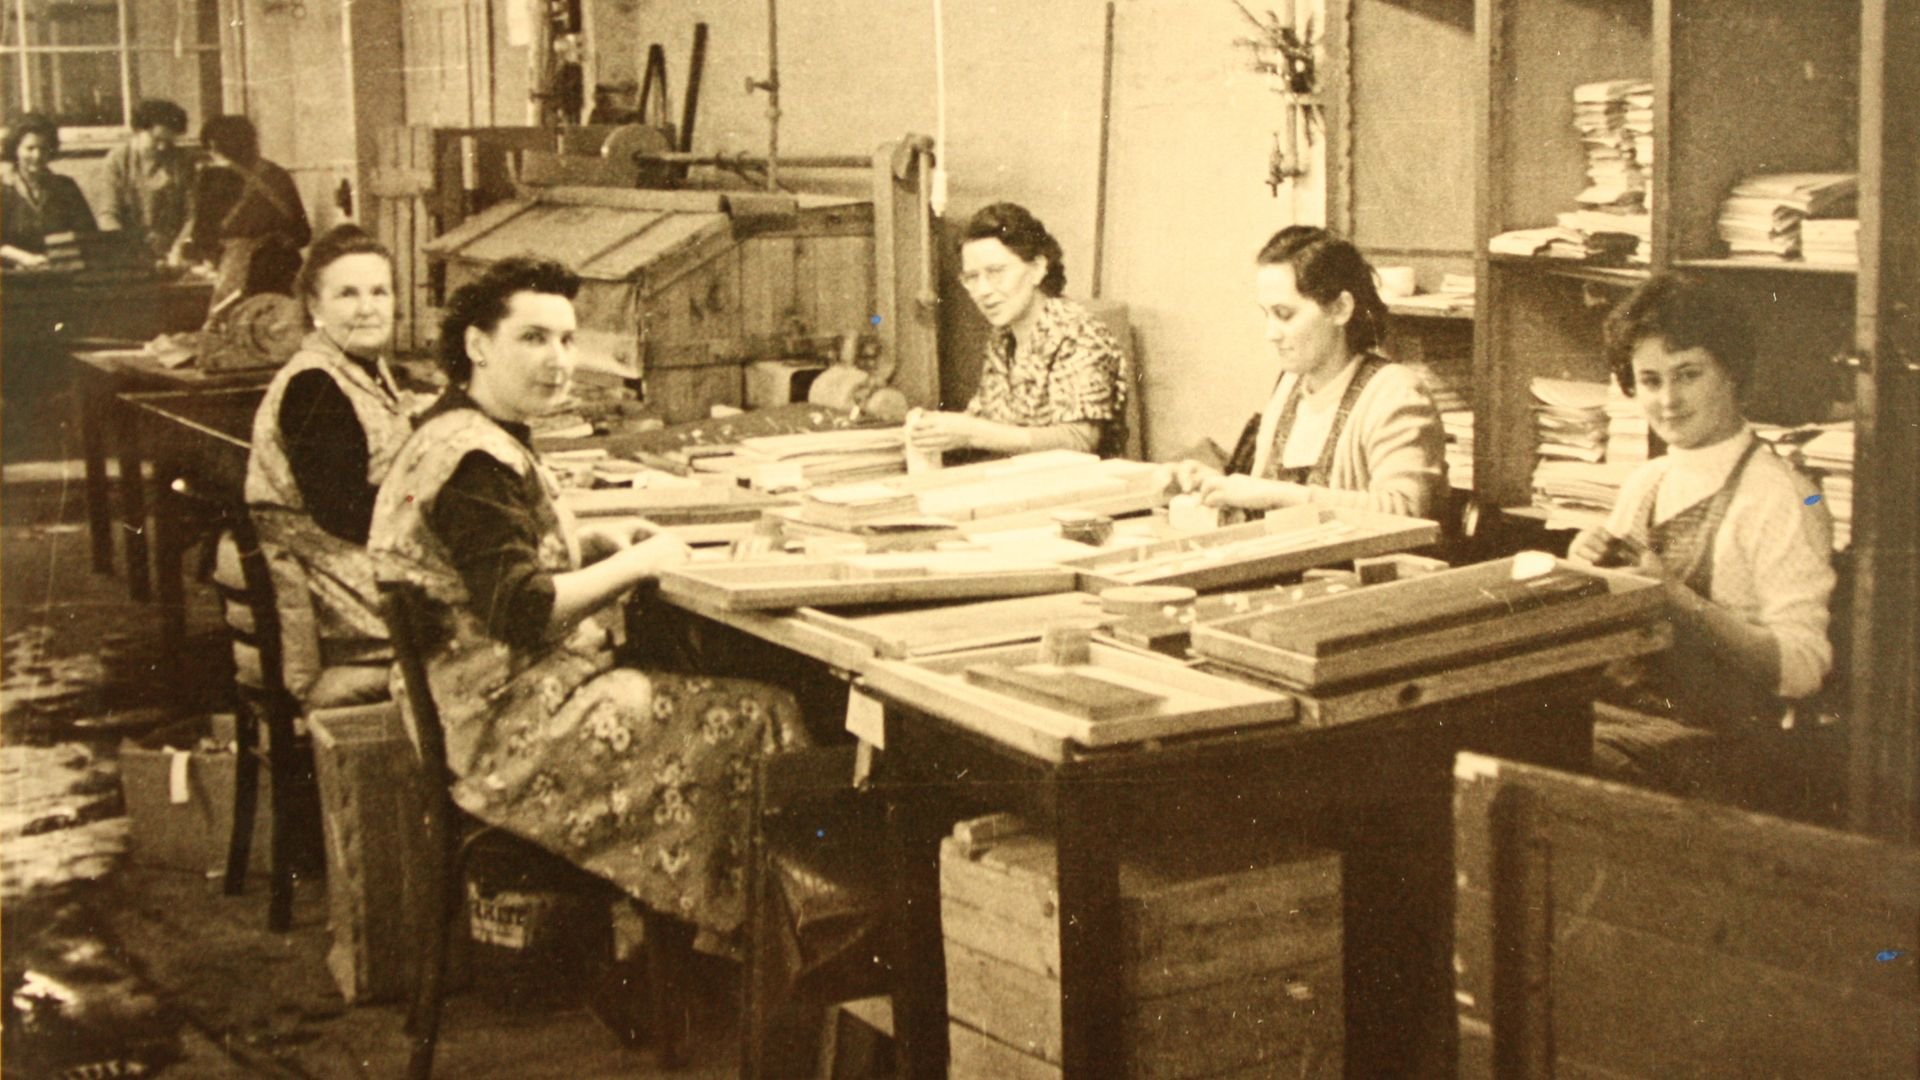 Old-fashioned image of women at a table in a work room.